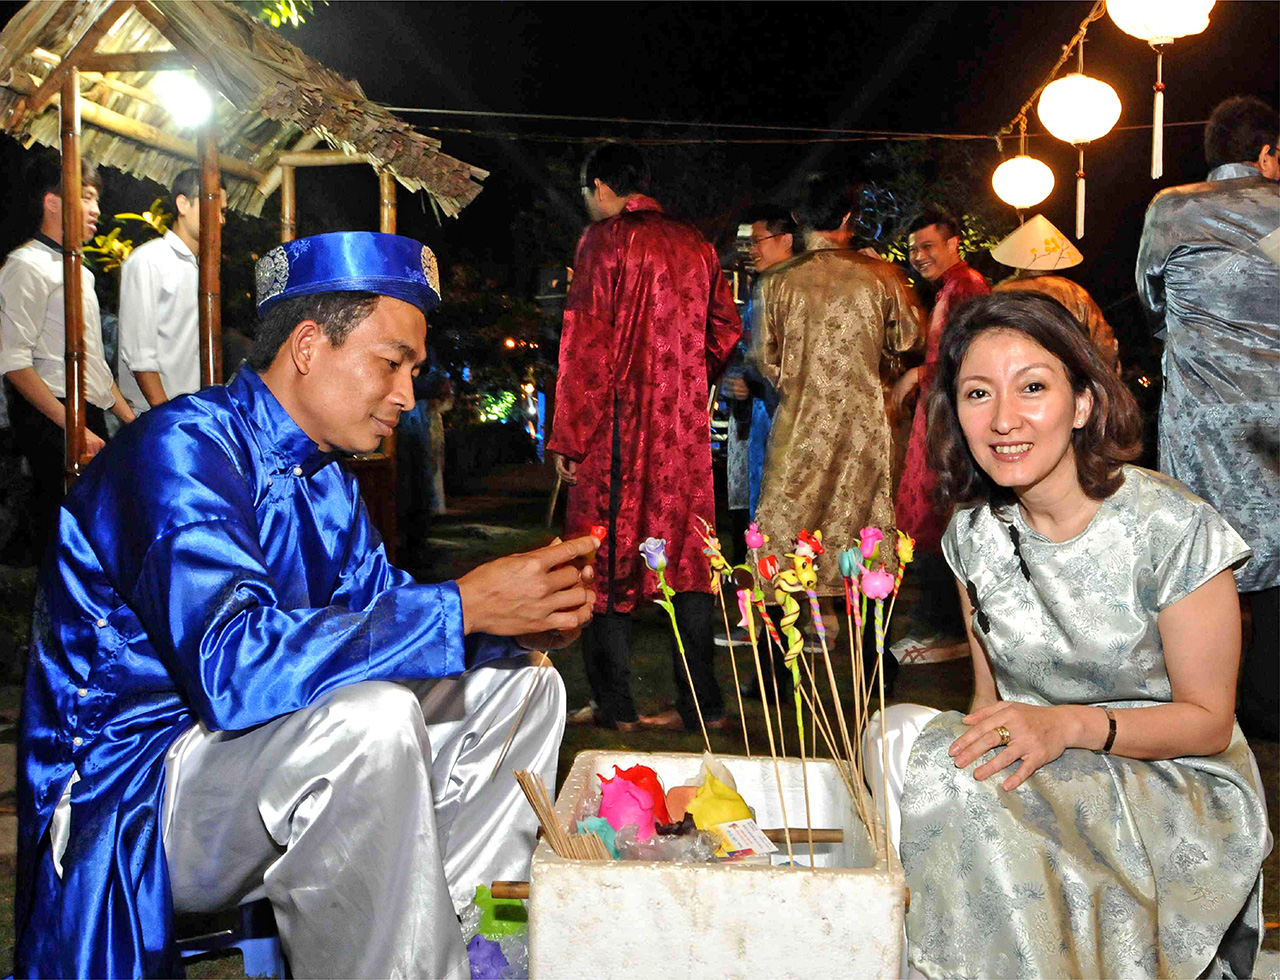 Delegates donned in cultural costumes, immersed in local arts and culinary fringe activities before a Gala dinner